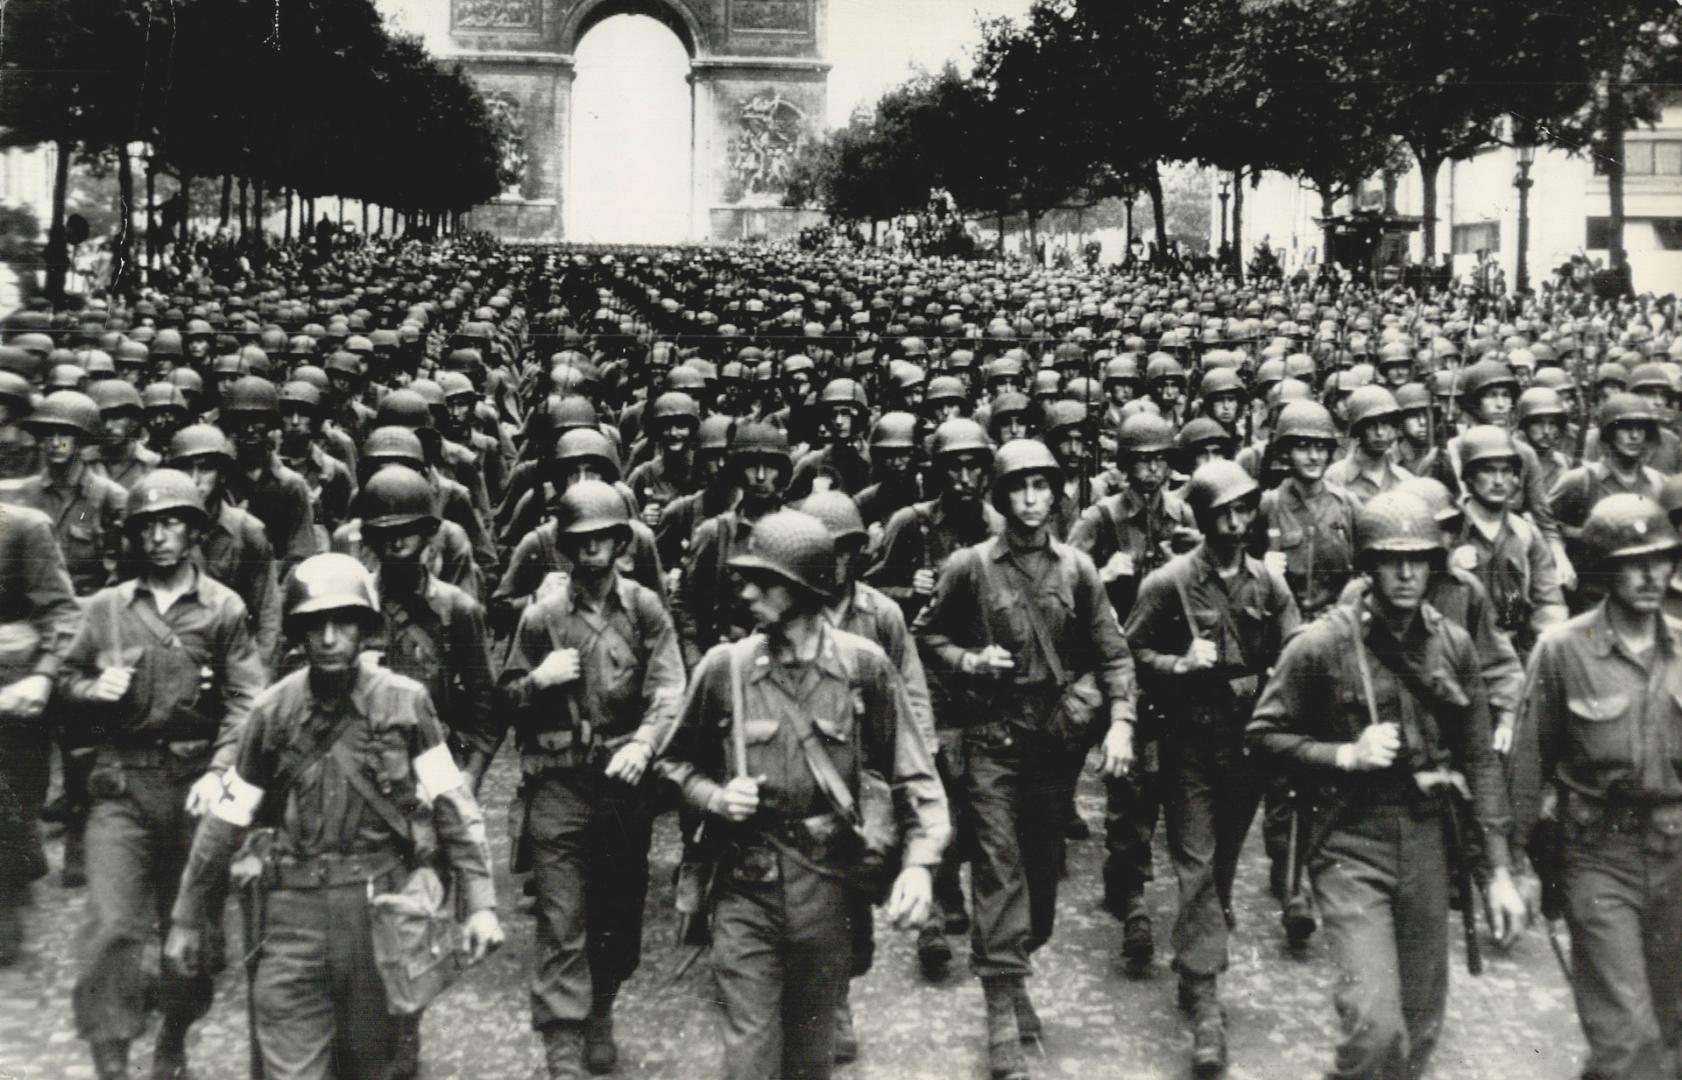 A great column of U.S. troops swings down the famous Champs Elysees, under the Arc de Triomphe, in Paris, during the victory parade held after the Fre(...)